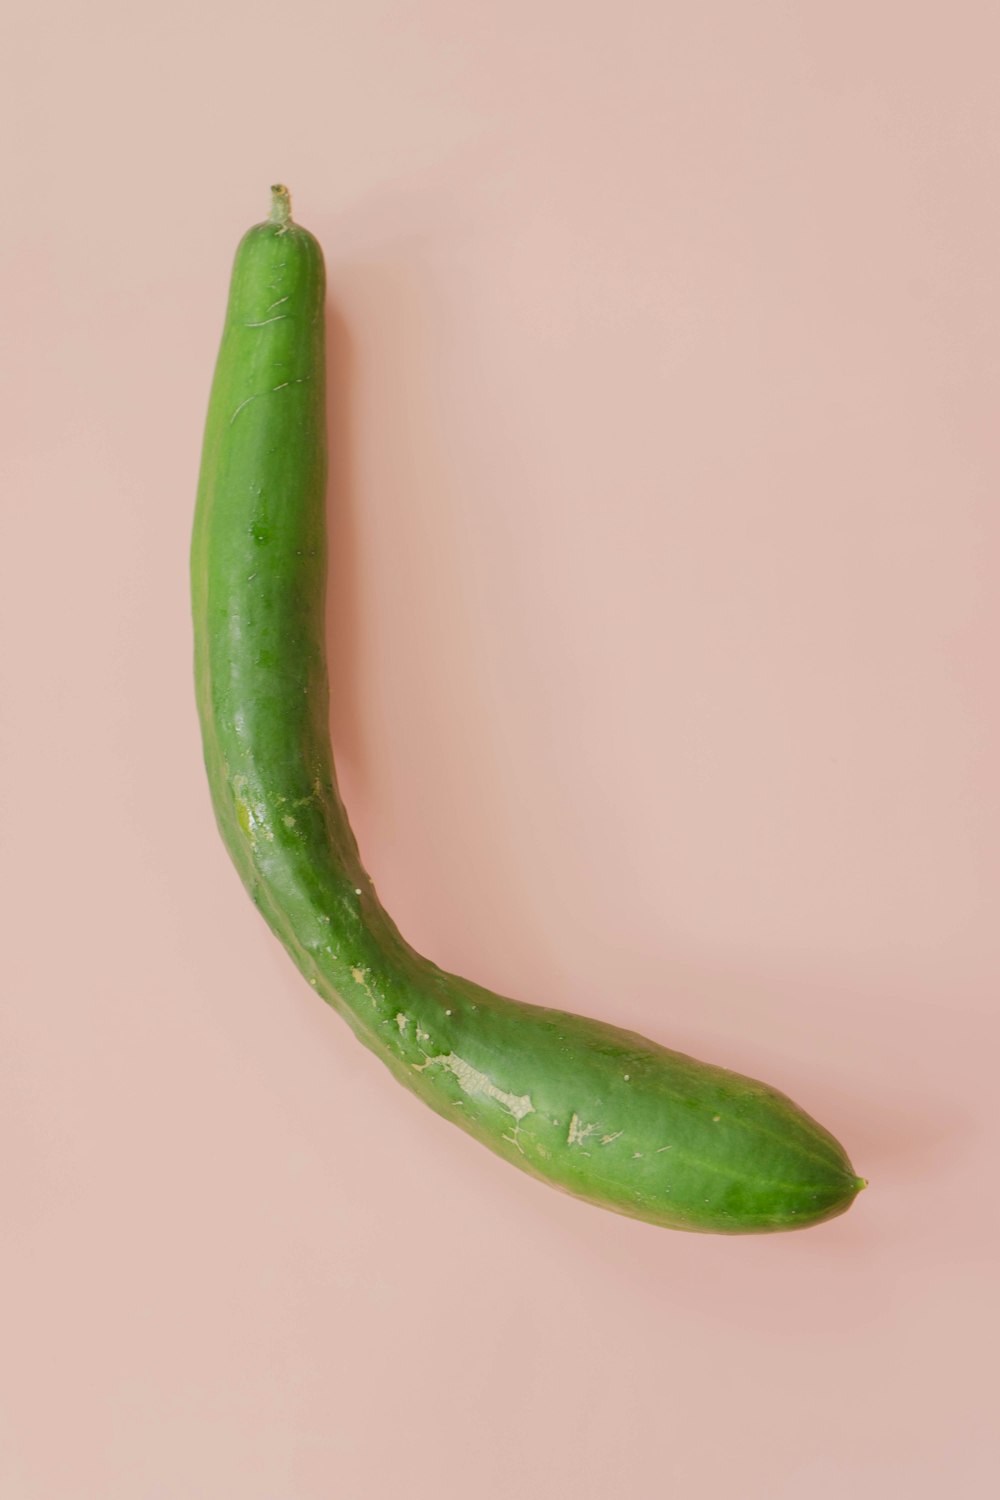 green chili on white surface